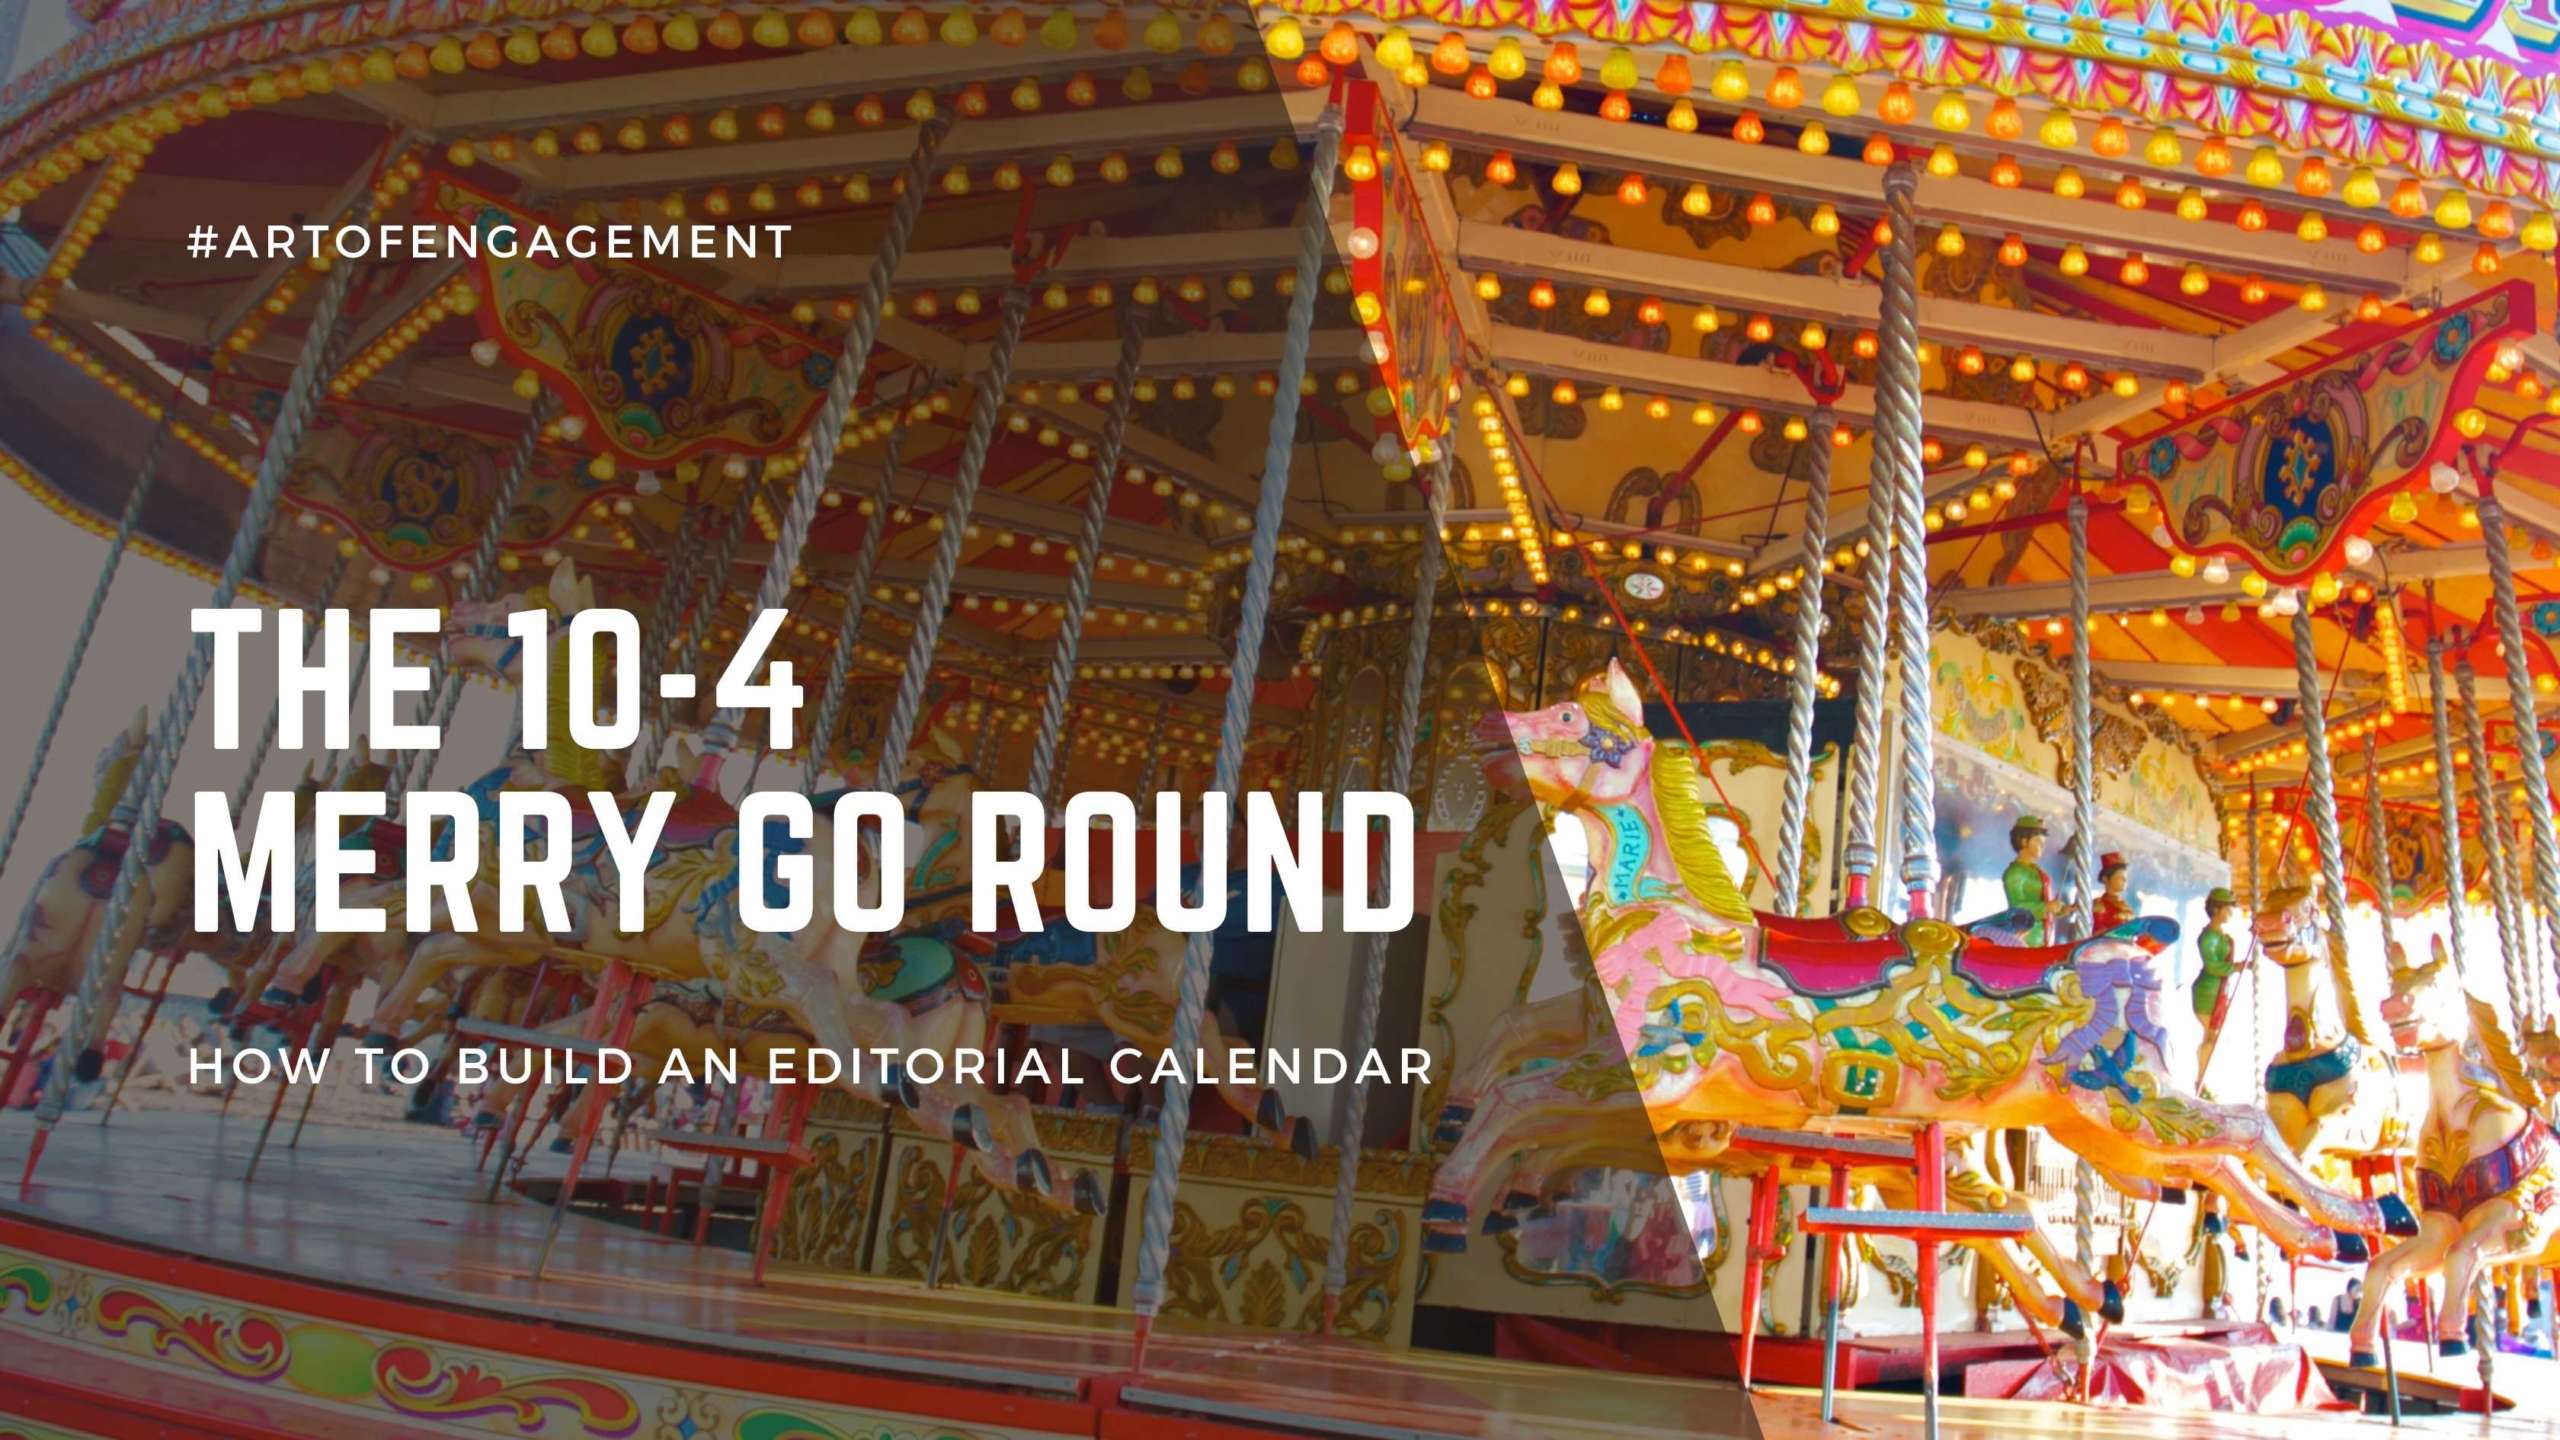 How To Build An Editorial Calendar Using The 10-4 Merry-Go-Round